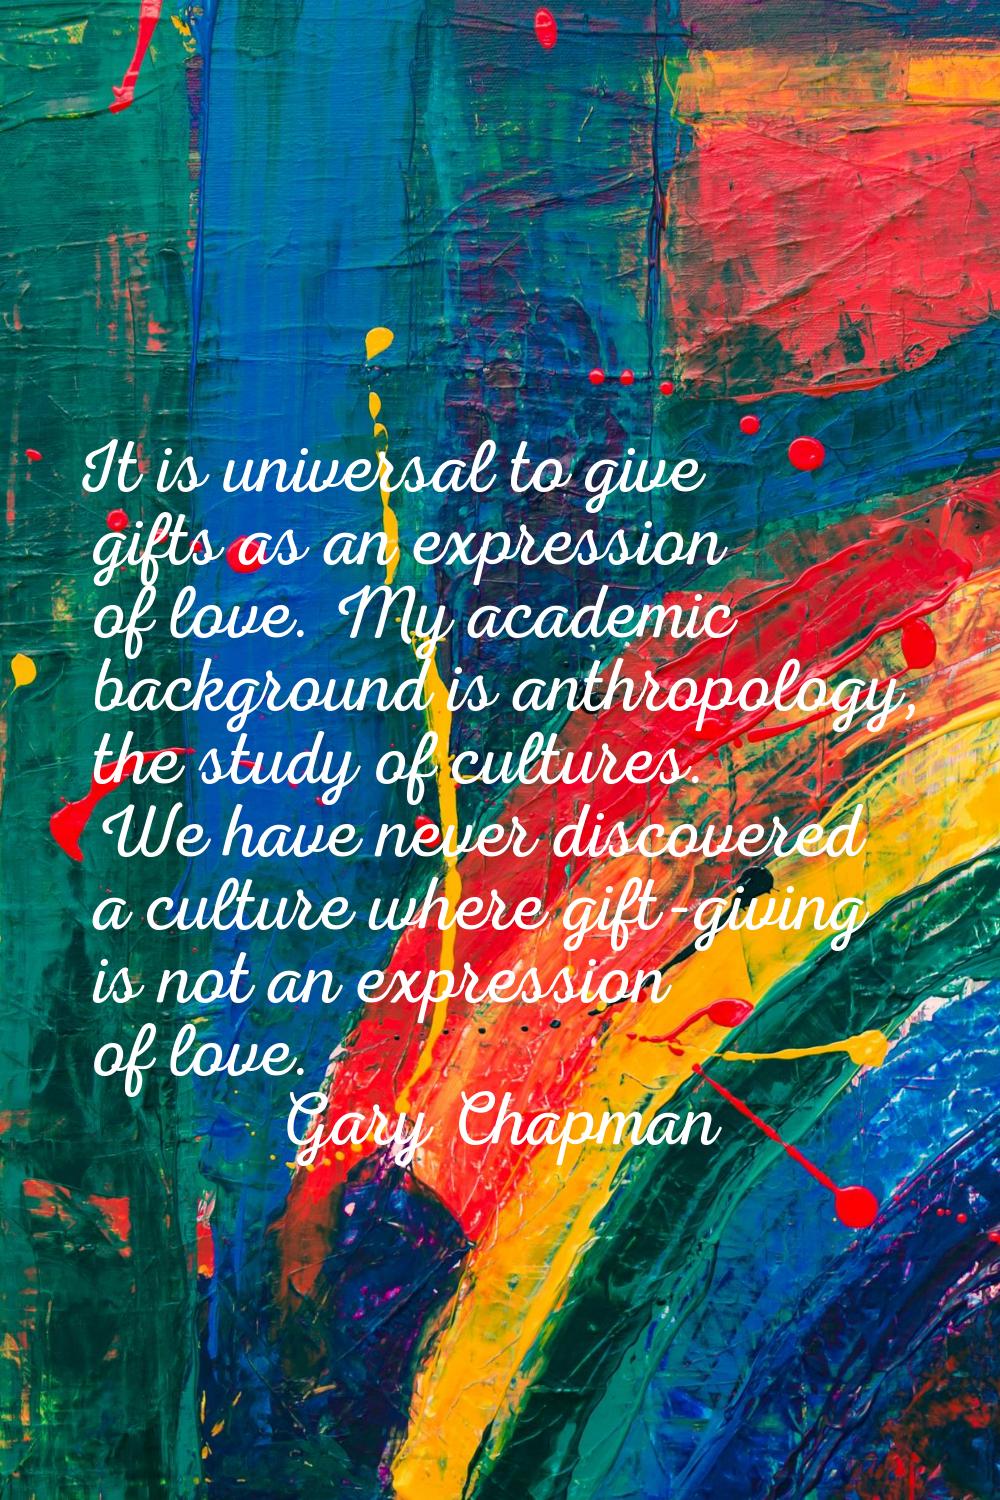 It is universal to give gifts as an expression of love. My academic background is anthropology, the